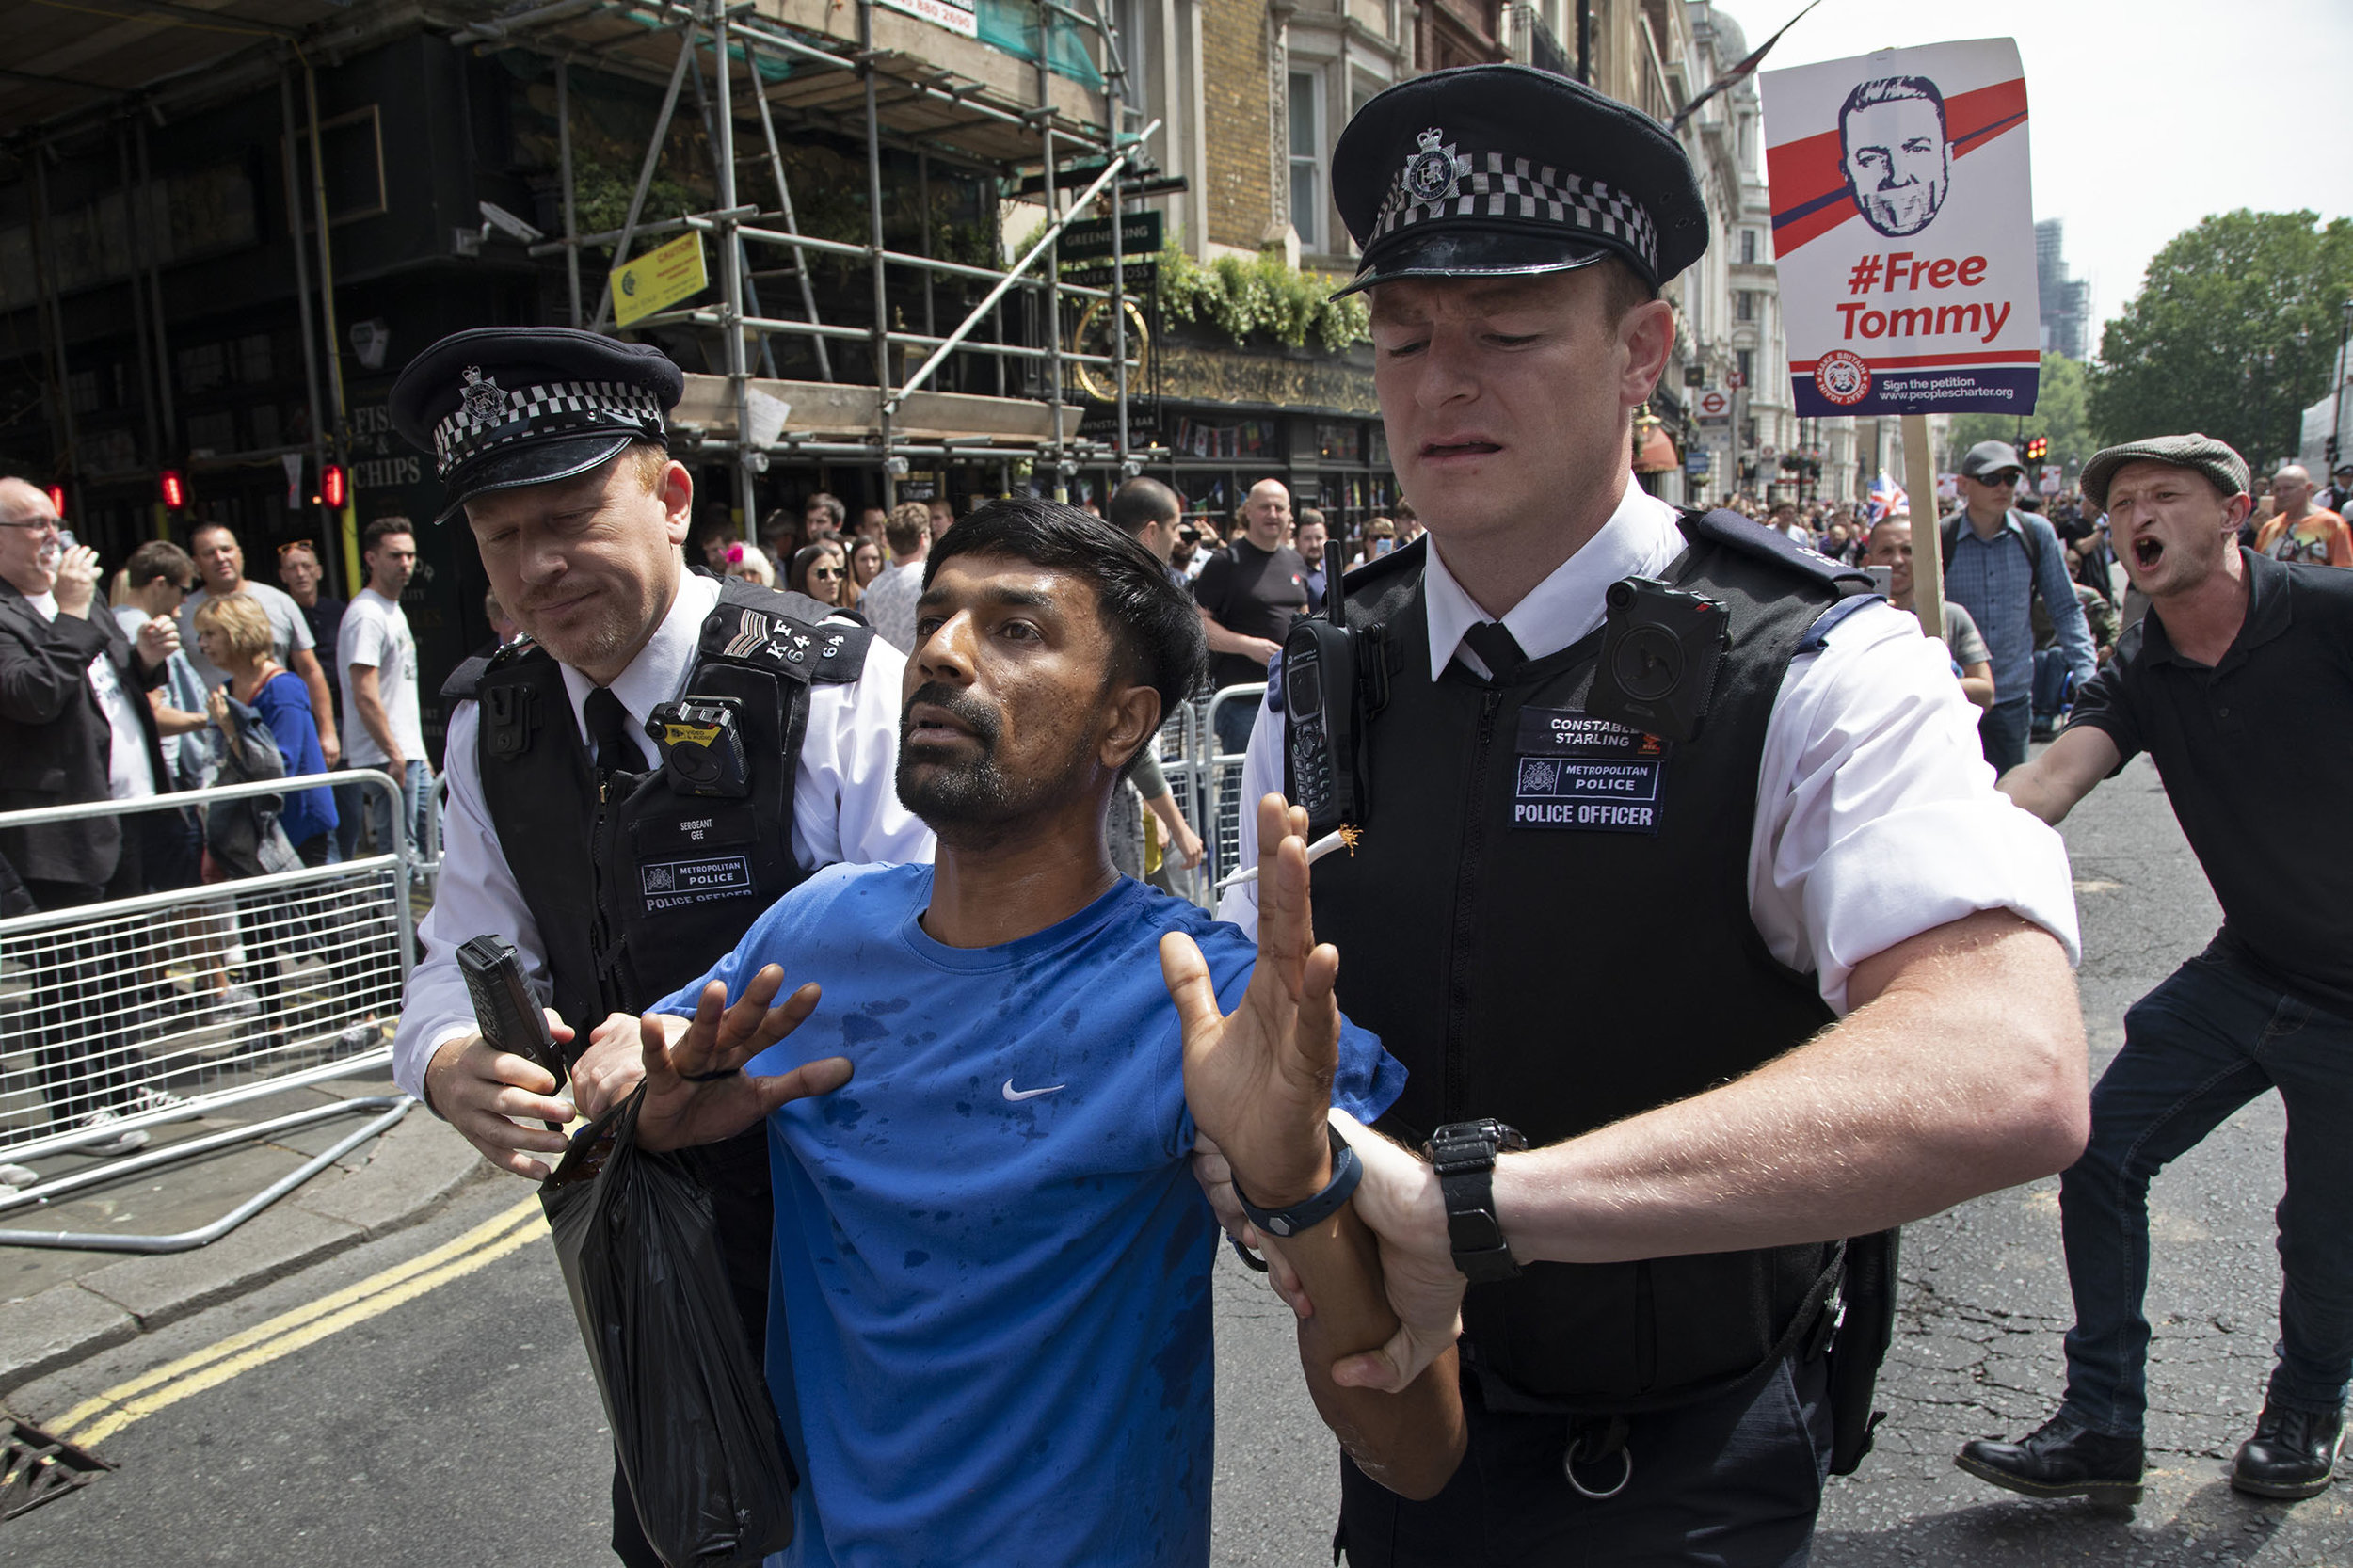  Protester is hauled away by police for his own safety during a demonstration calling for the release from jail of former English Defence League leader Tommy Robinson. 